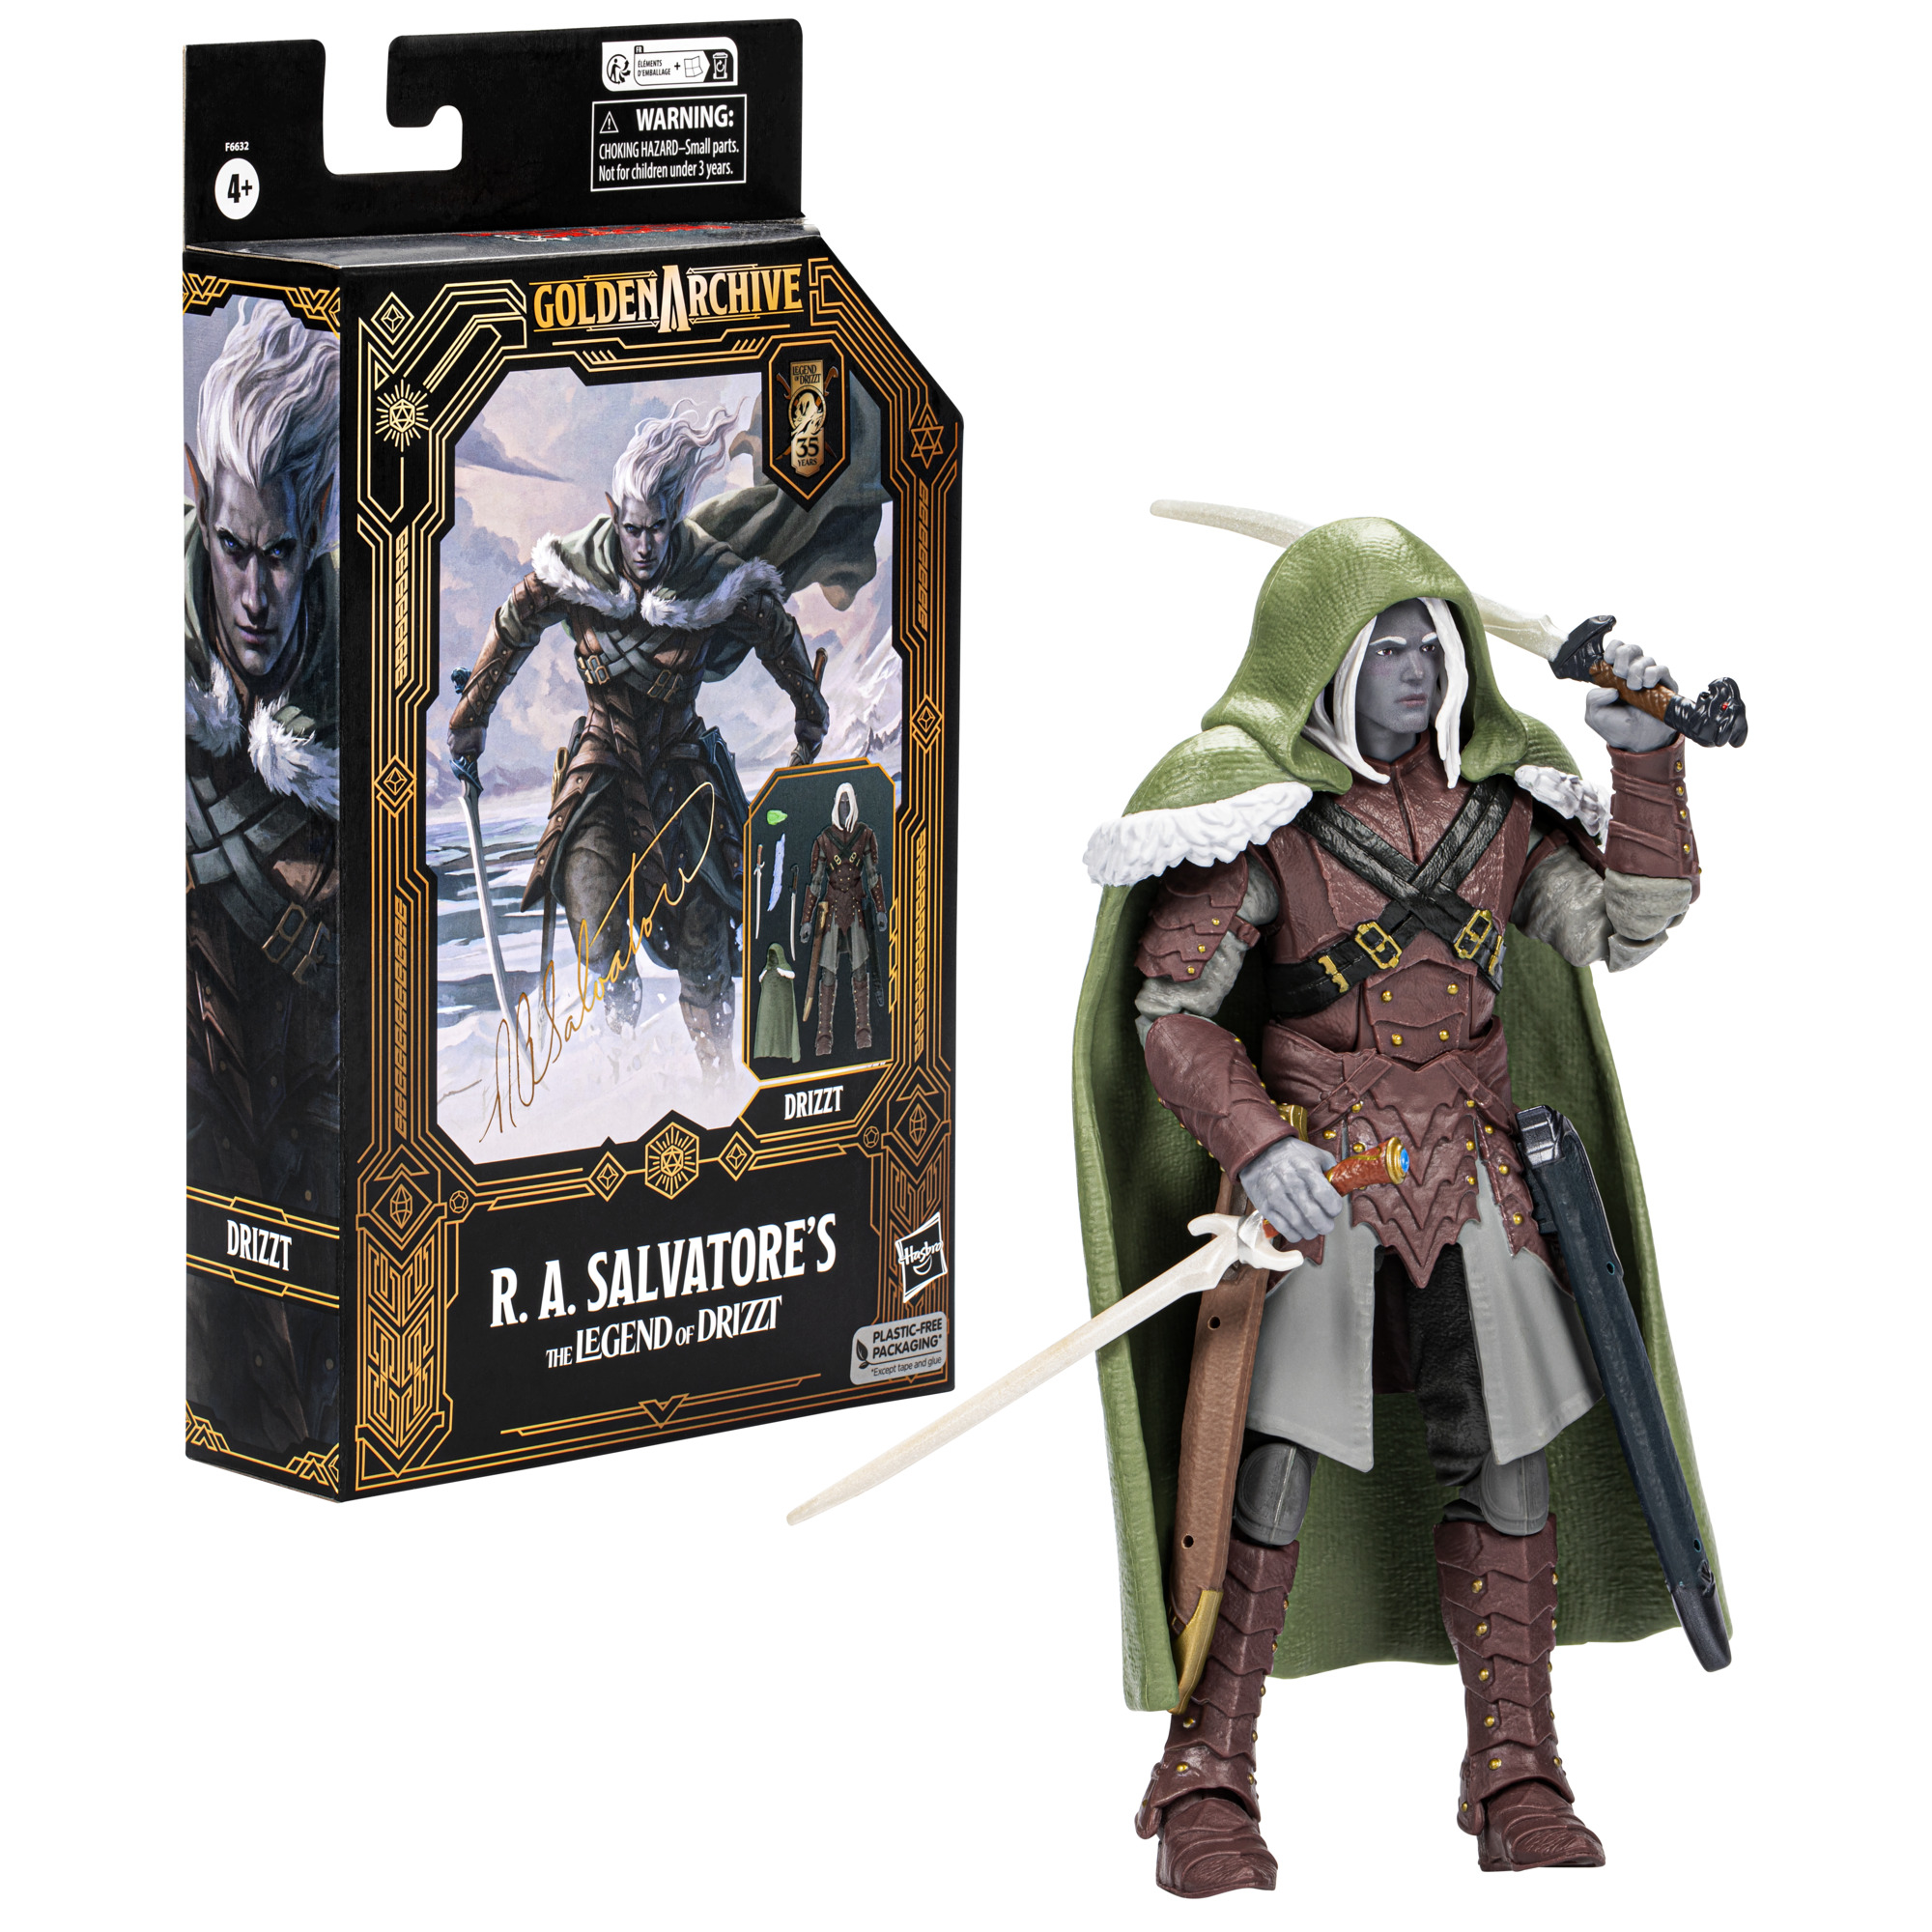 Dungeons & Dragons Golden Archive Drizzt 6in Action Figure Case